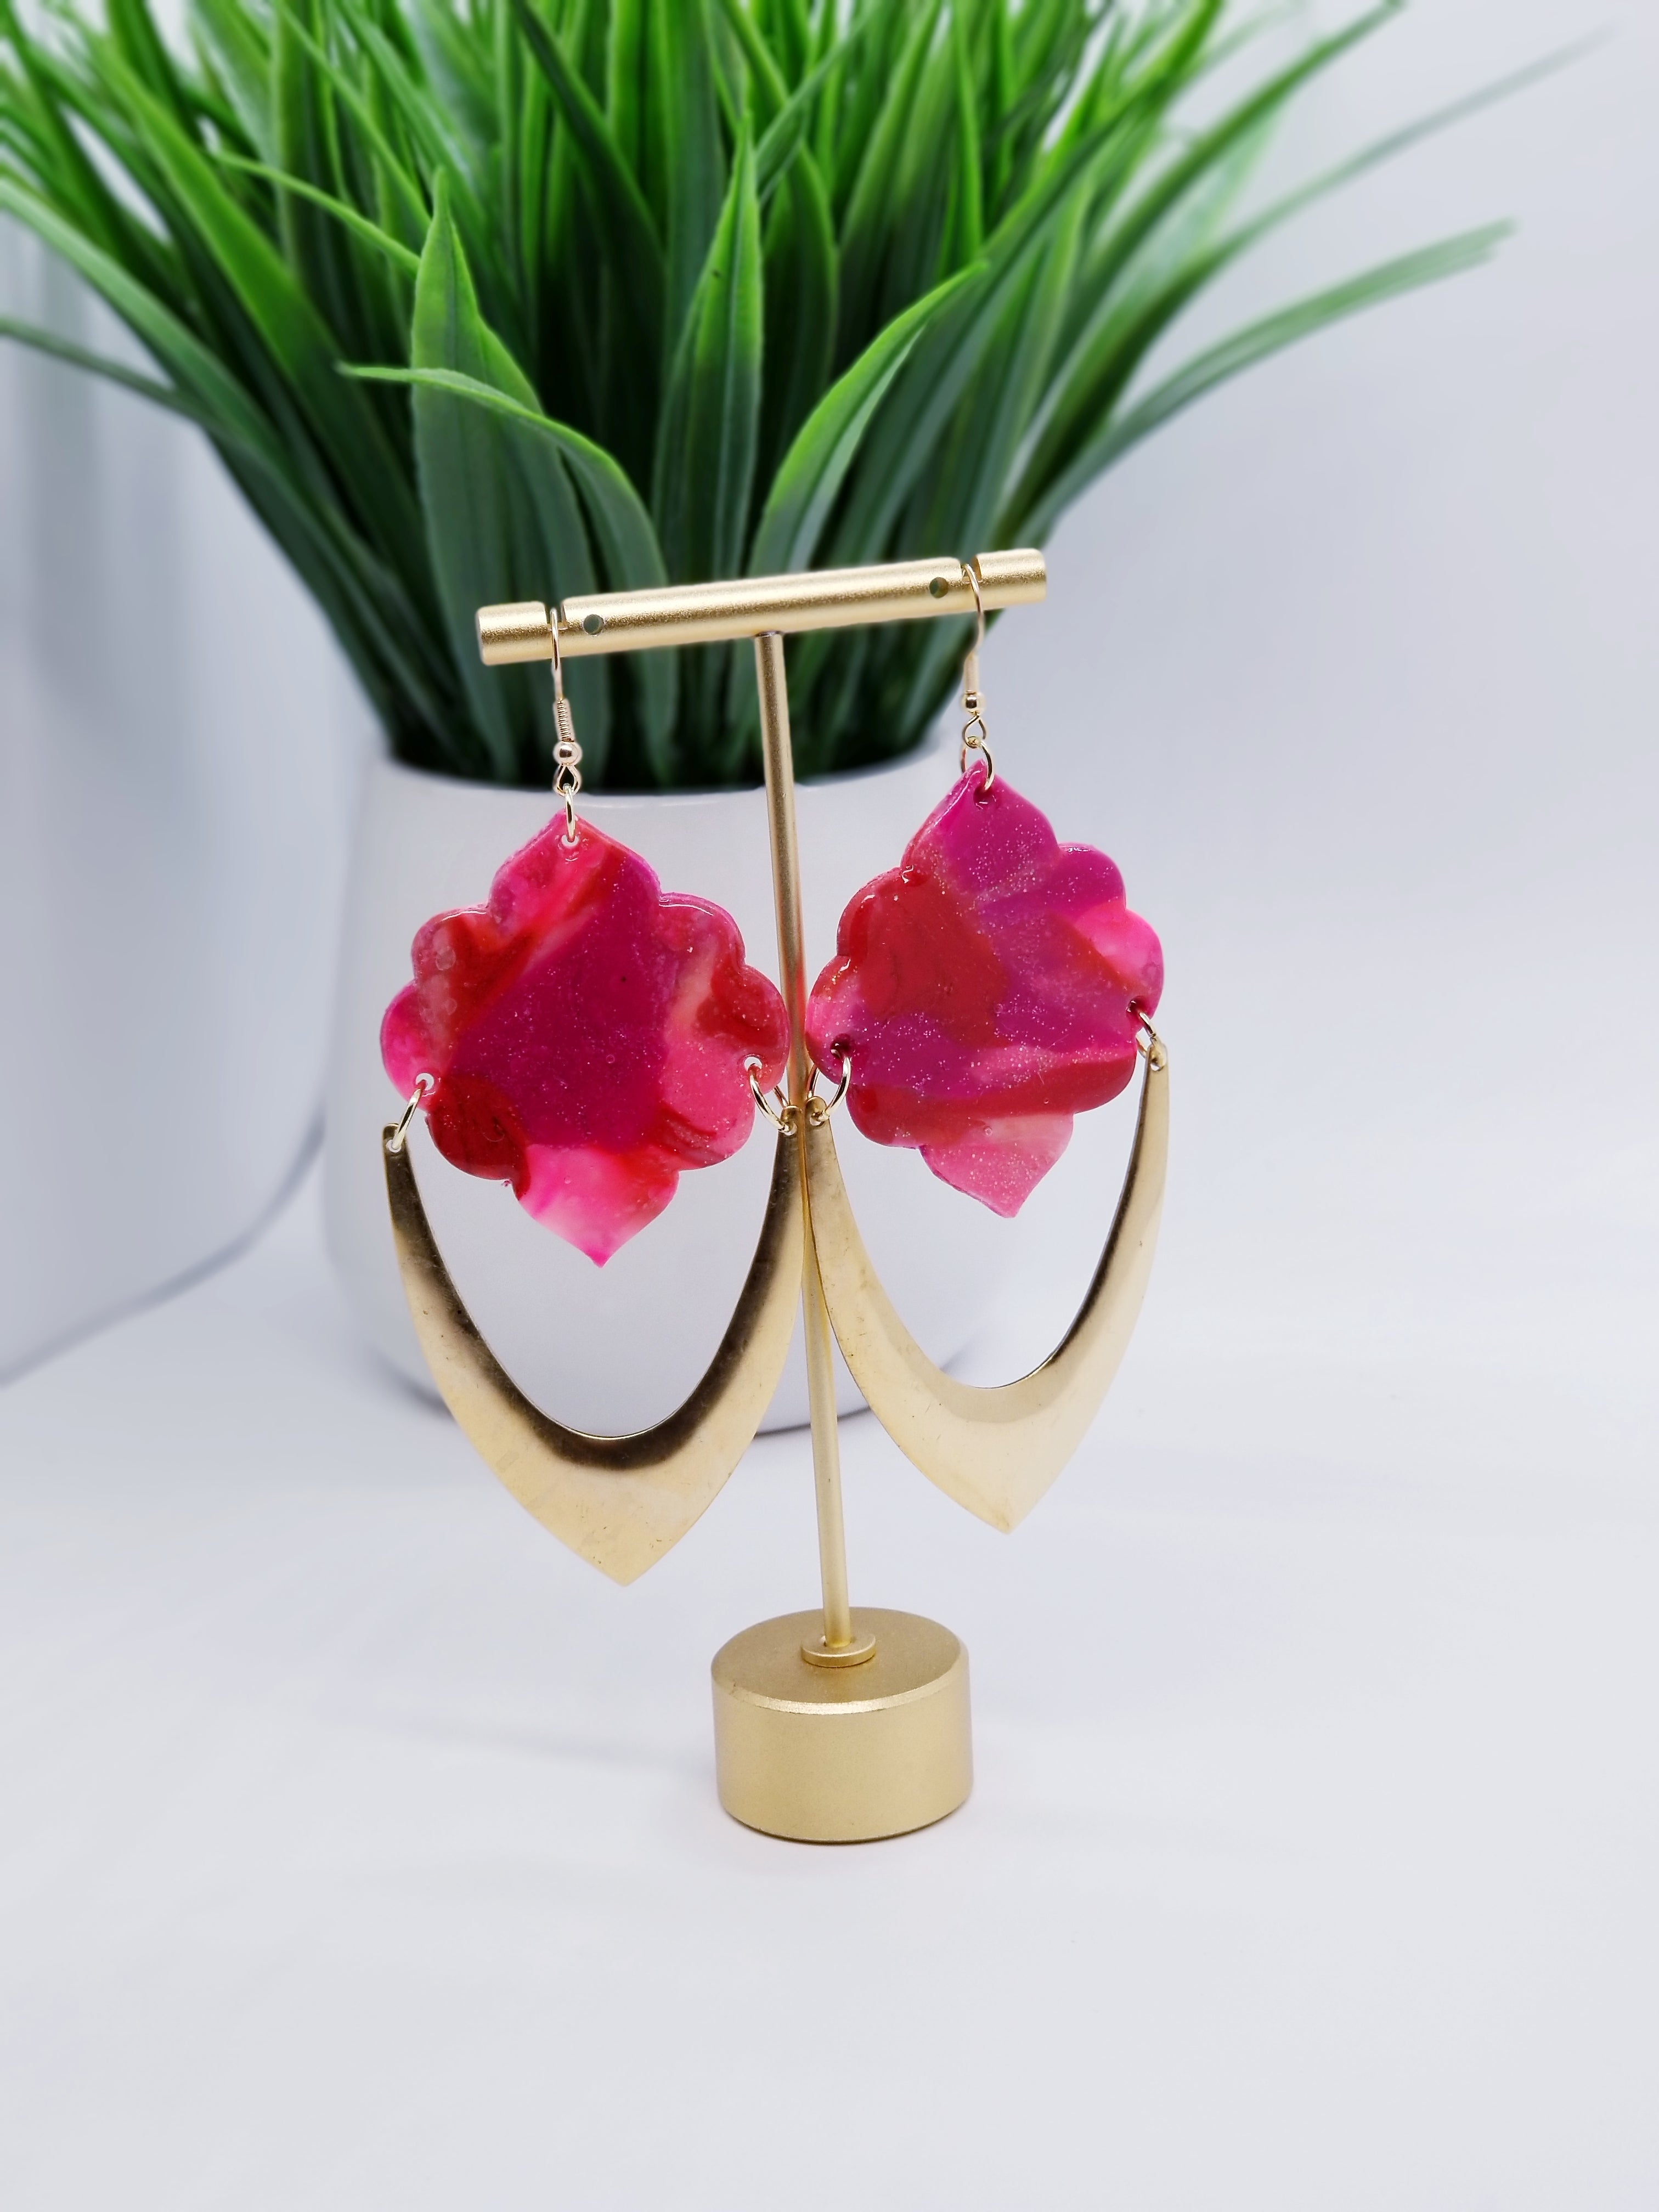 Length: 3.5 inches | Weight: 0.7 ounces   Designed just for you! The earrings are handmade using red pink and swirl gold resin scalloped design, gold arch charm, gold jump rings, gold head pins, and hypoallergenic hooks with back closures. 